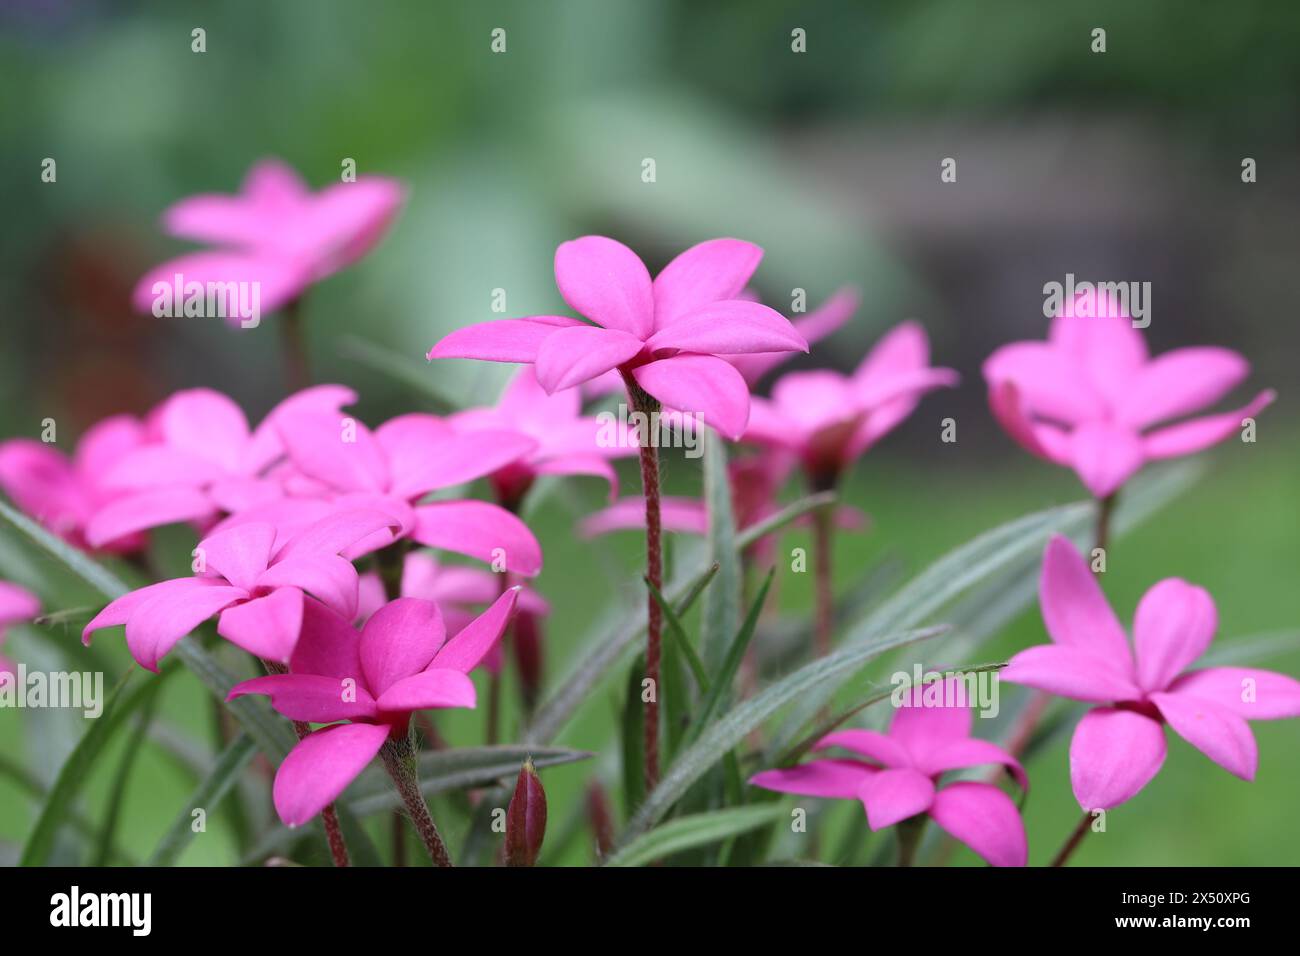 Close-up of side view of pink sunlit rhodohypoxis flowers with selective focus, blurred background Stock Photo